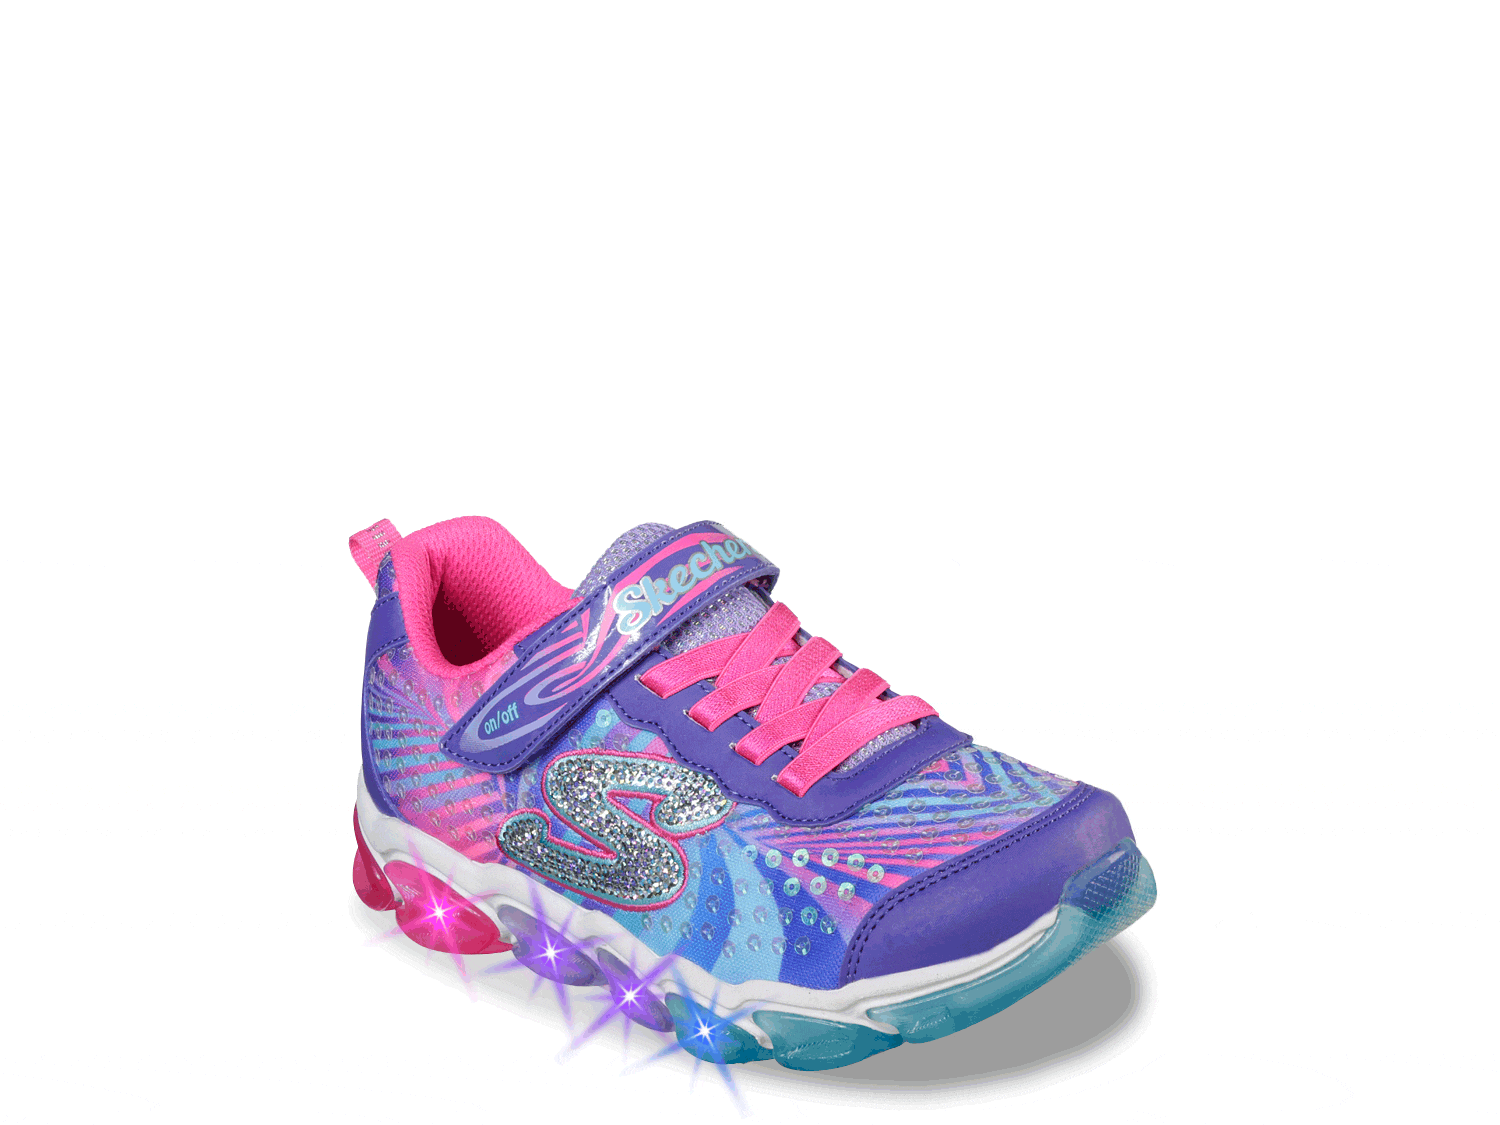 skechers light up jelly shoes